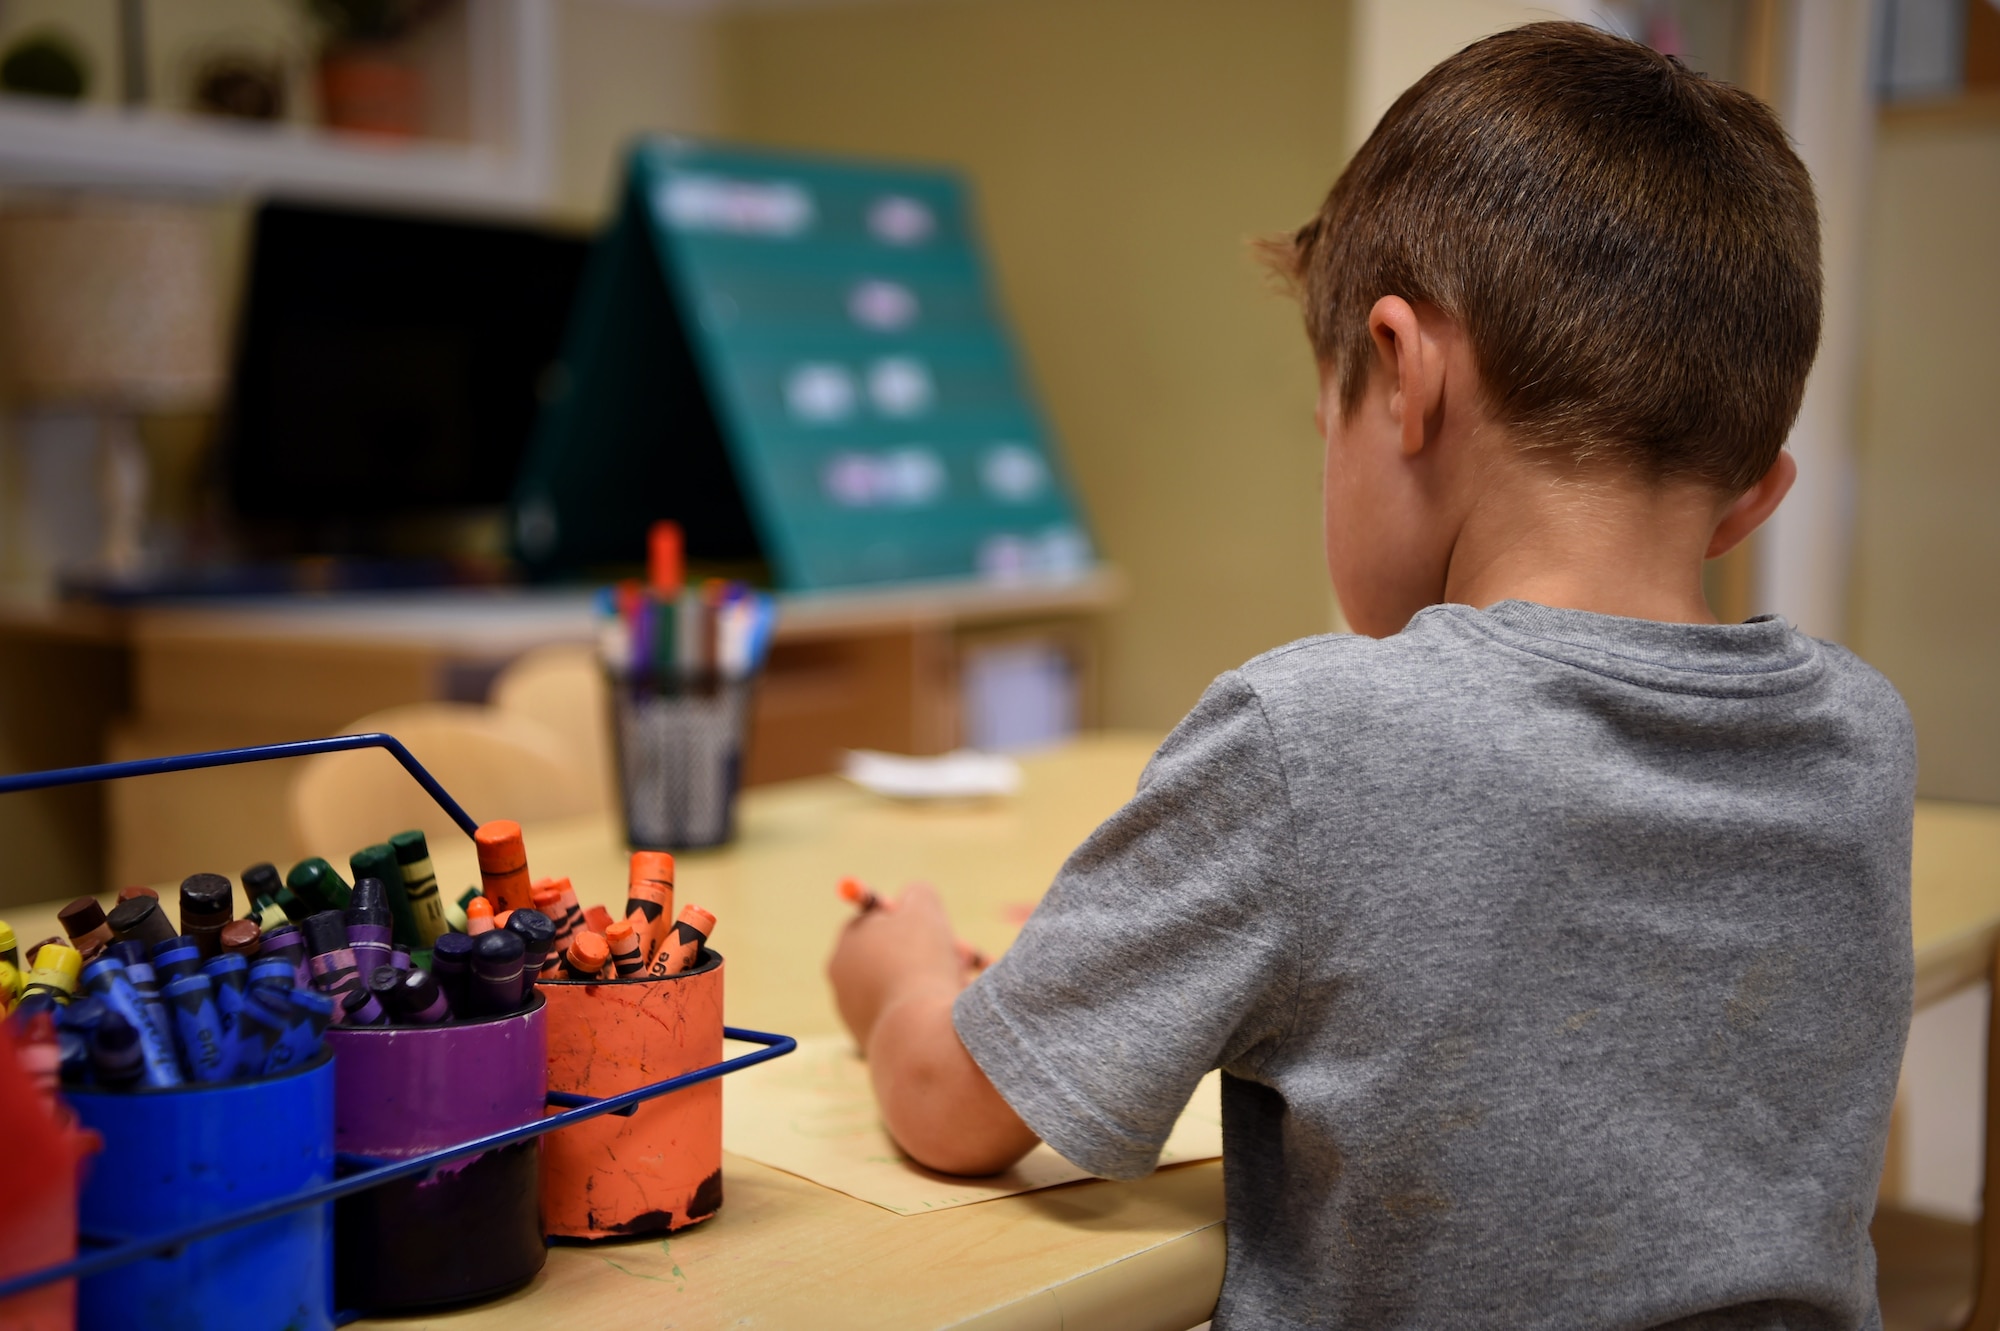 A child participates in arts and crafts at the Child Development Center, July 26, 2018, on Buckley Air Force Base, Colorado. The CDC staff supports the development of the whole child and provides active, hands on learning experiences to meet the individual needs of each child in the program. (U.S. Air Force photo by Airman 1st Class Codie Collins)